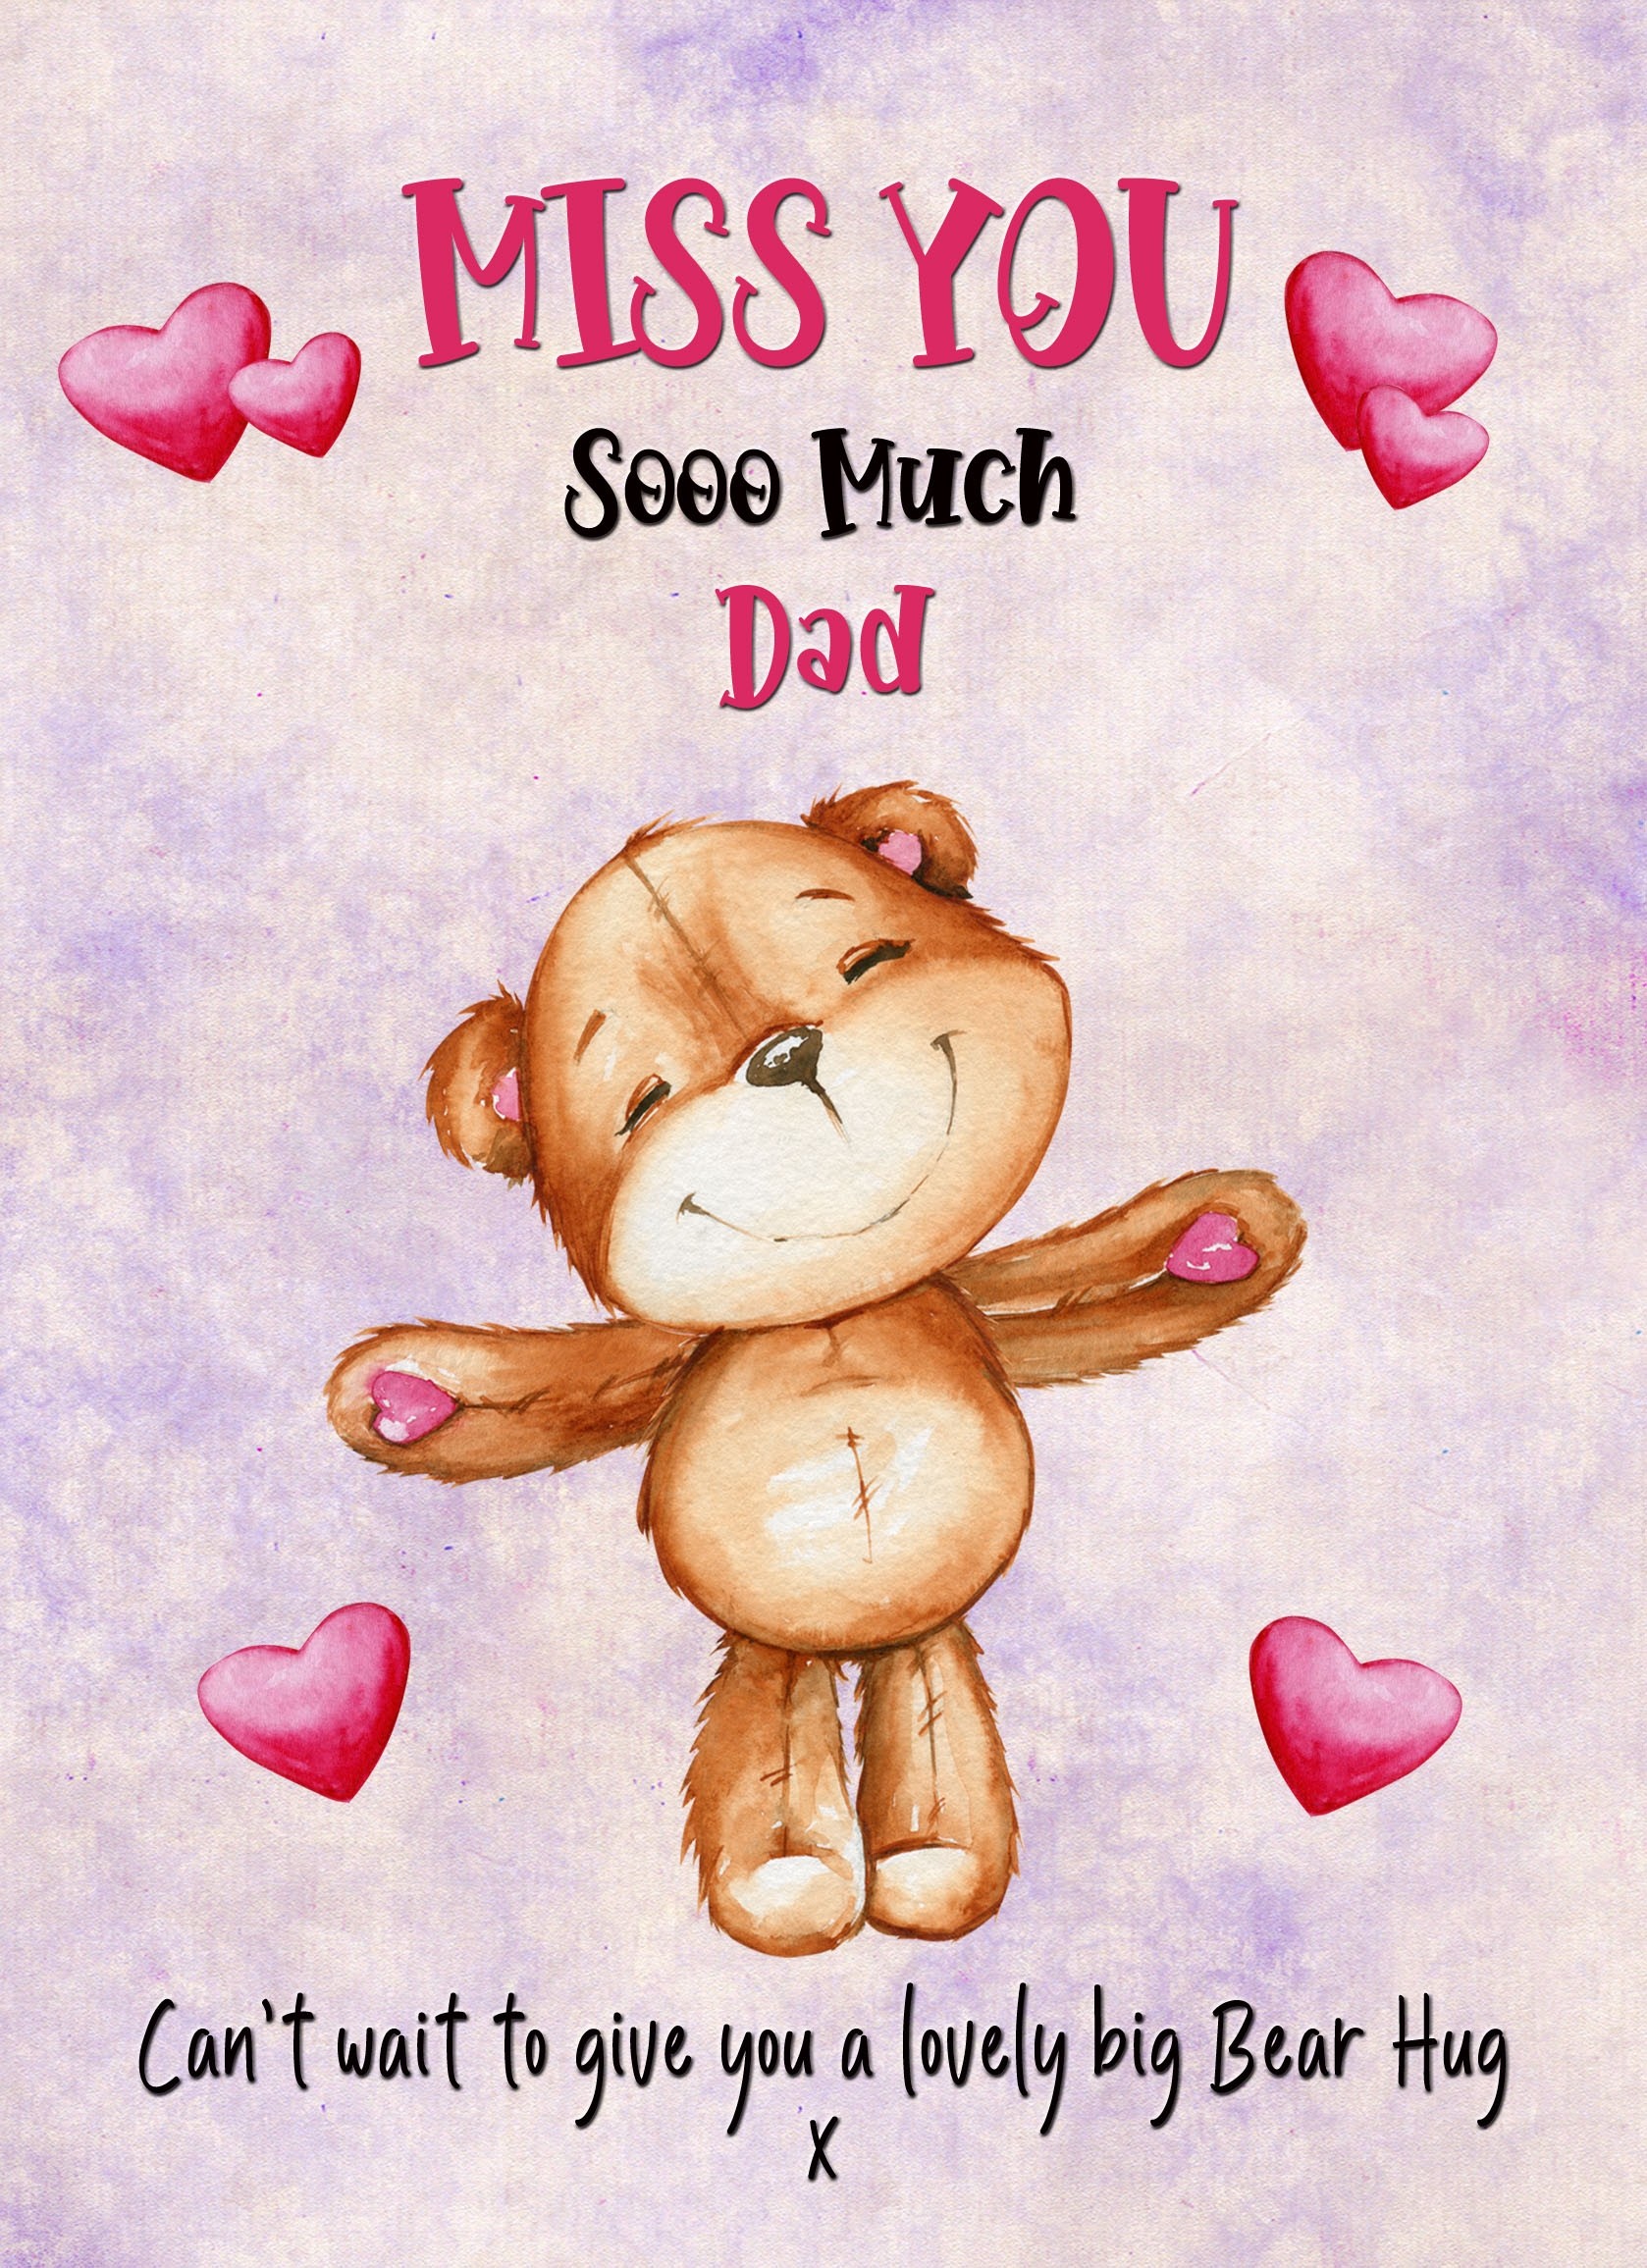 Missing You Card For Dad (Hearts)